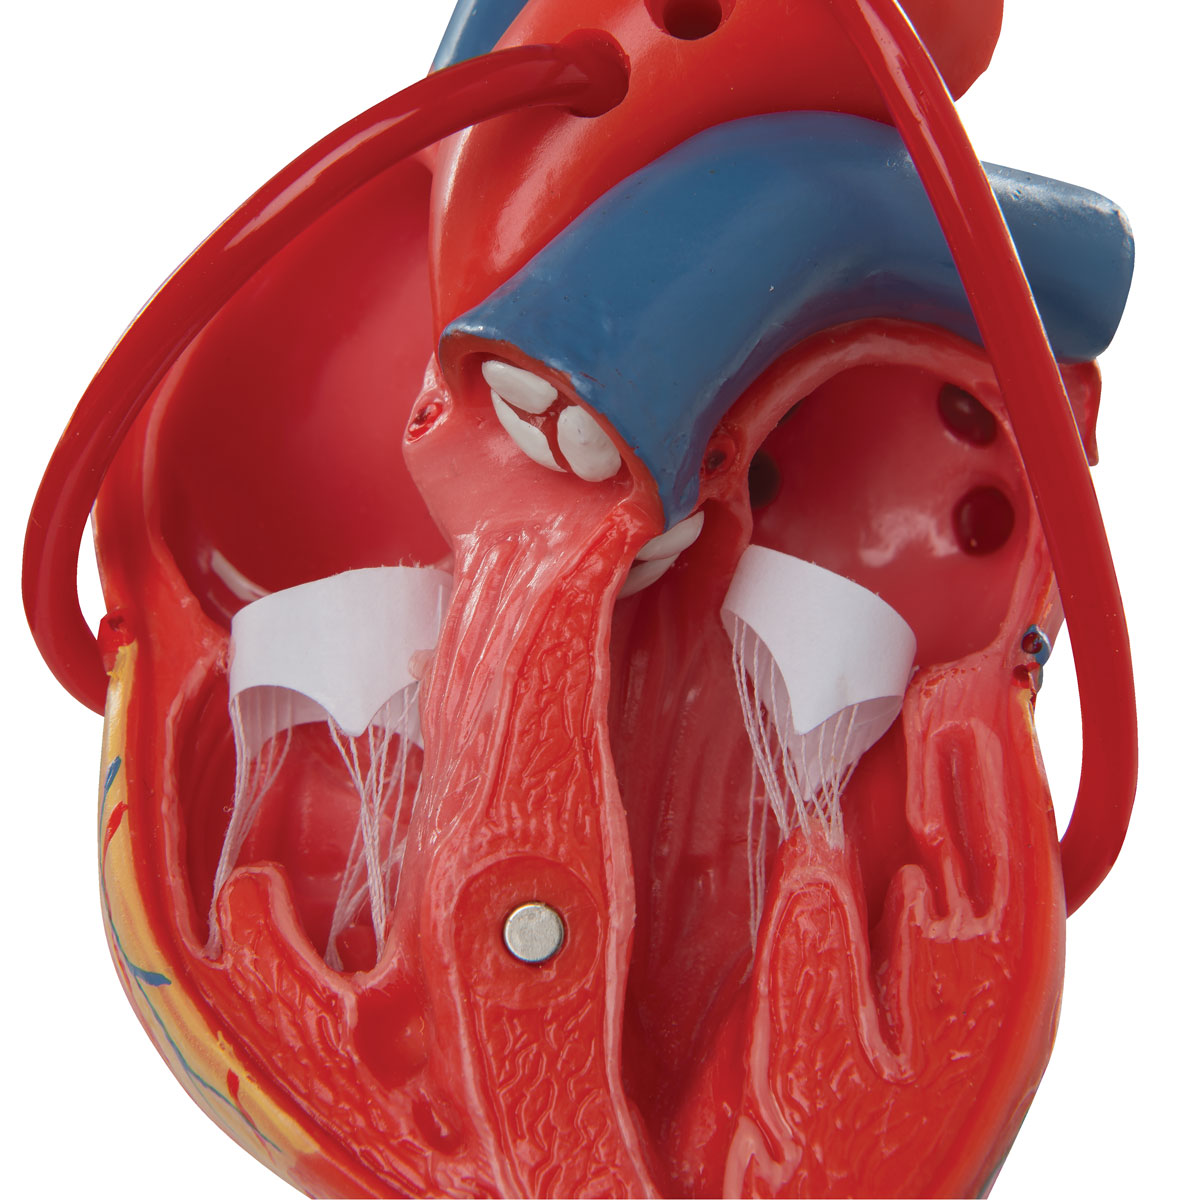 Heart model showing the result after a bypass operation